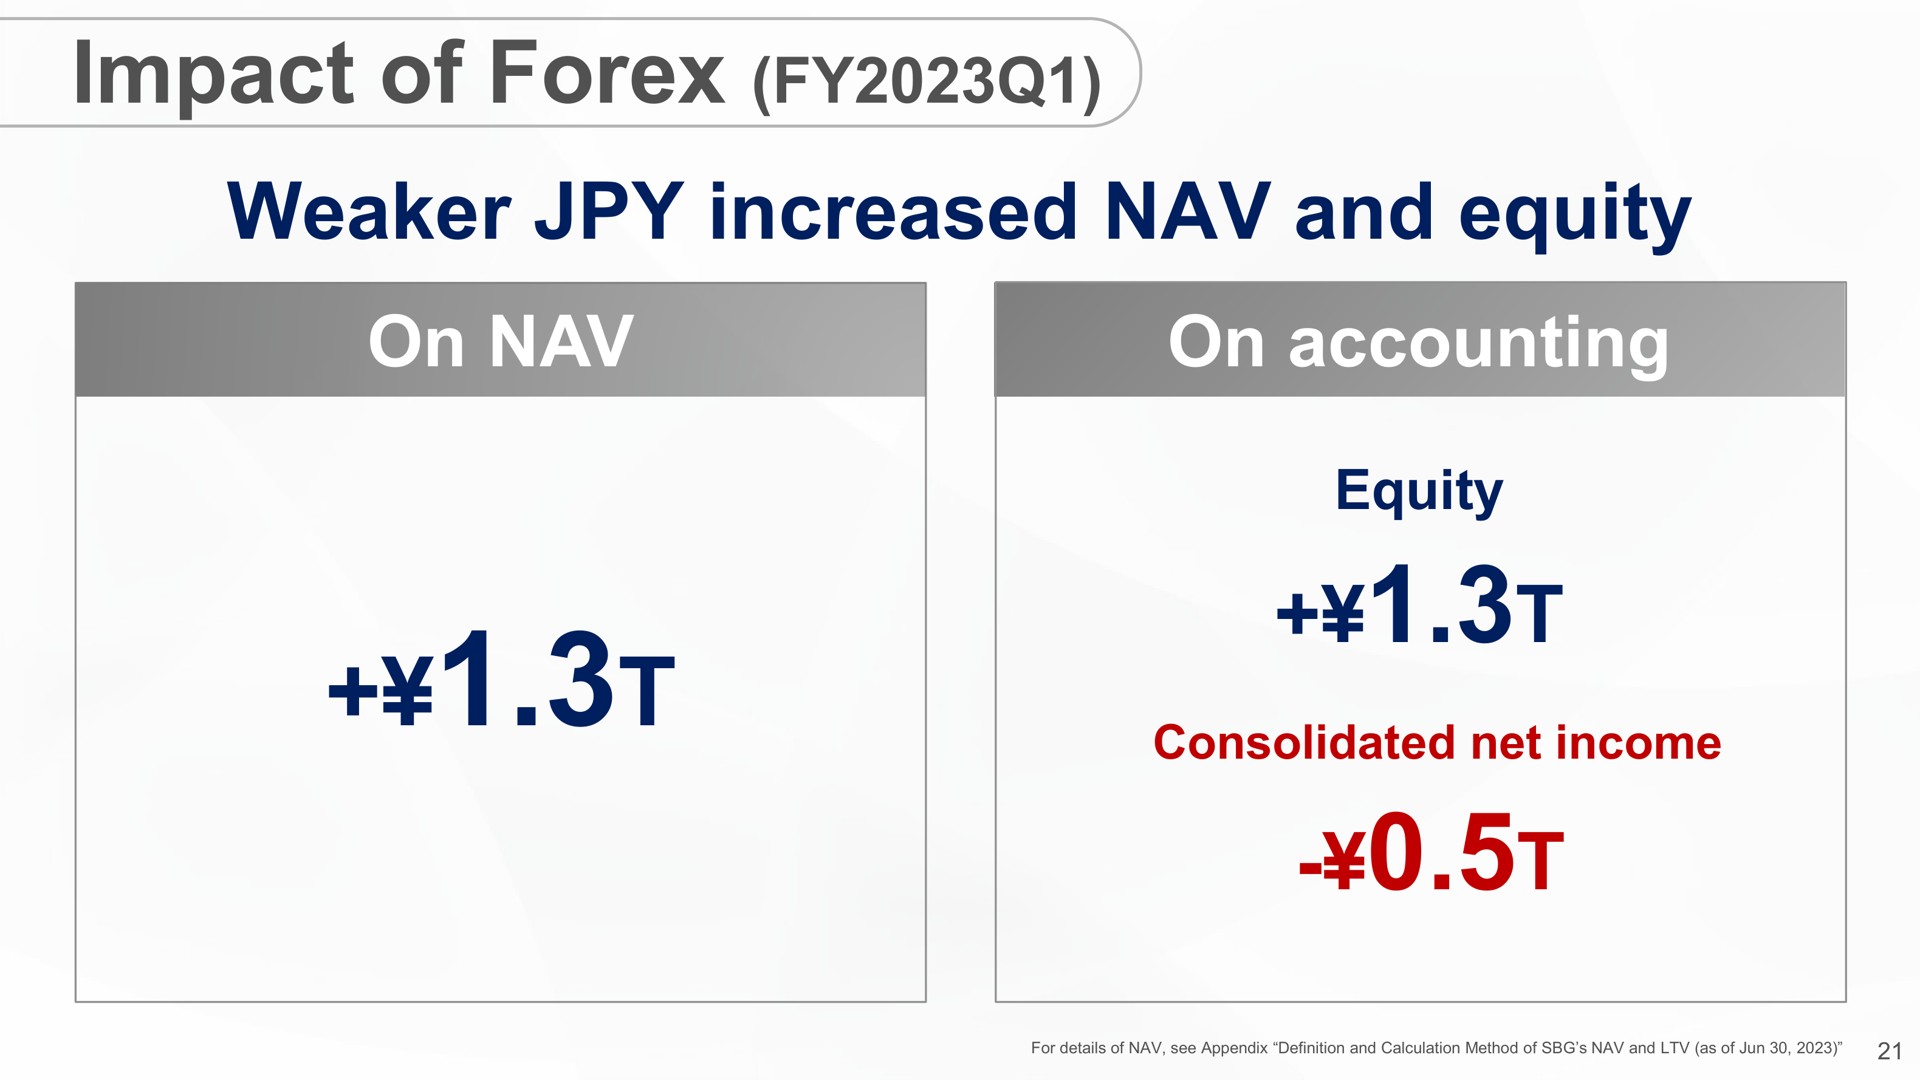 impact of increased and equity on on accounting | SoftBank